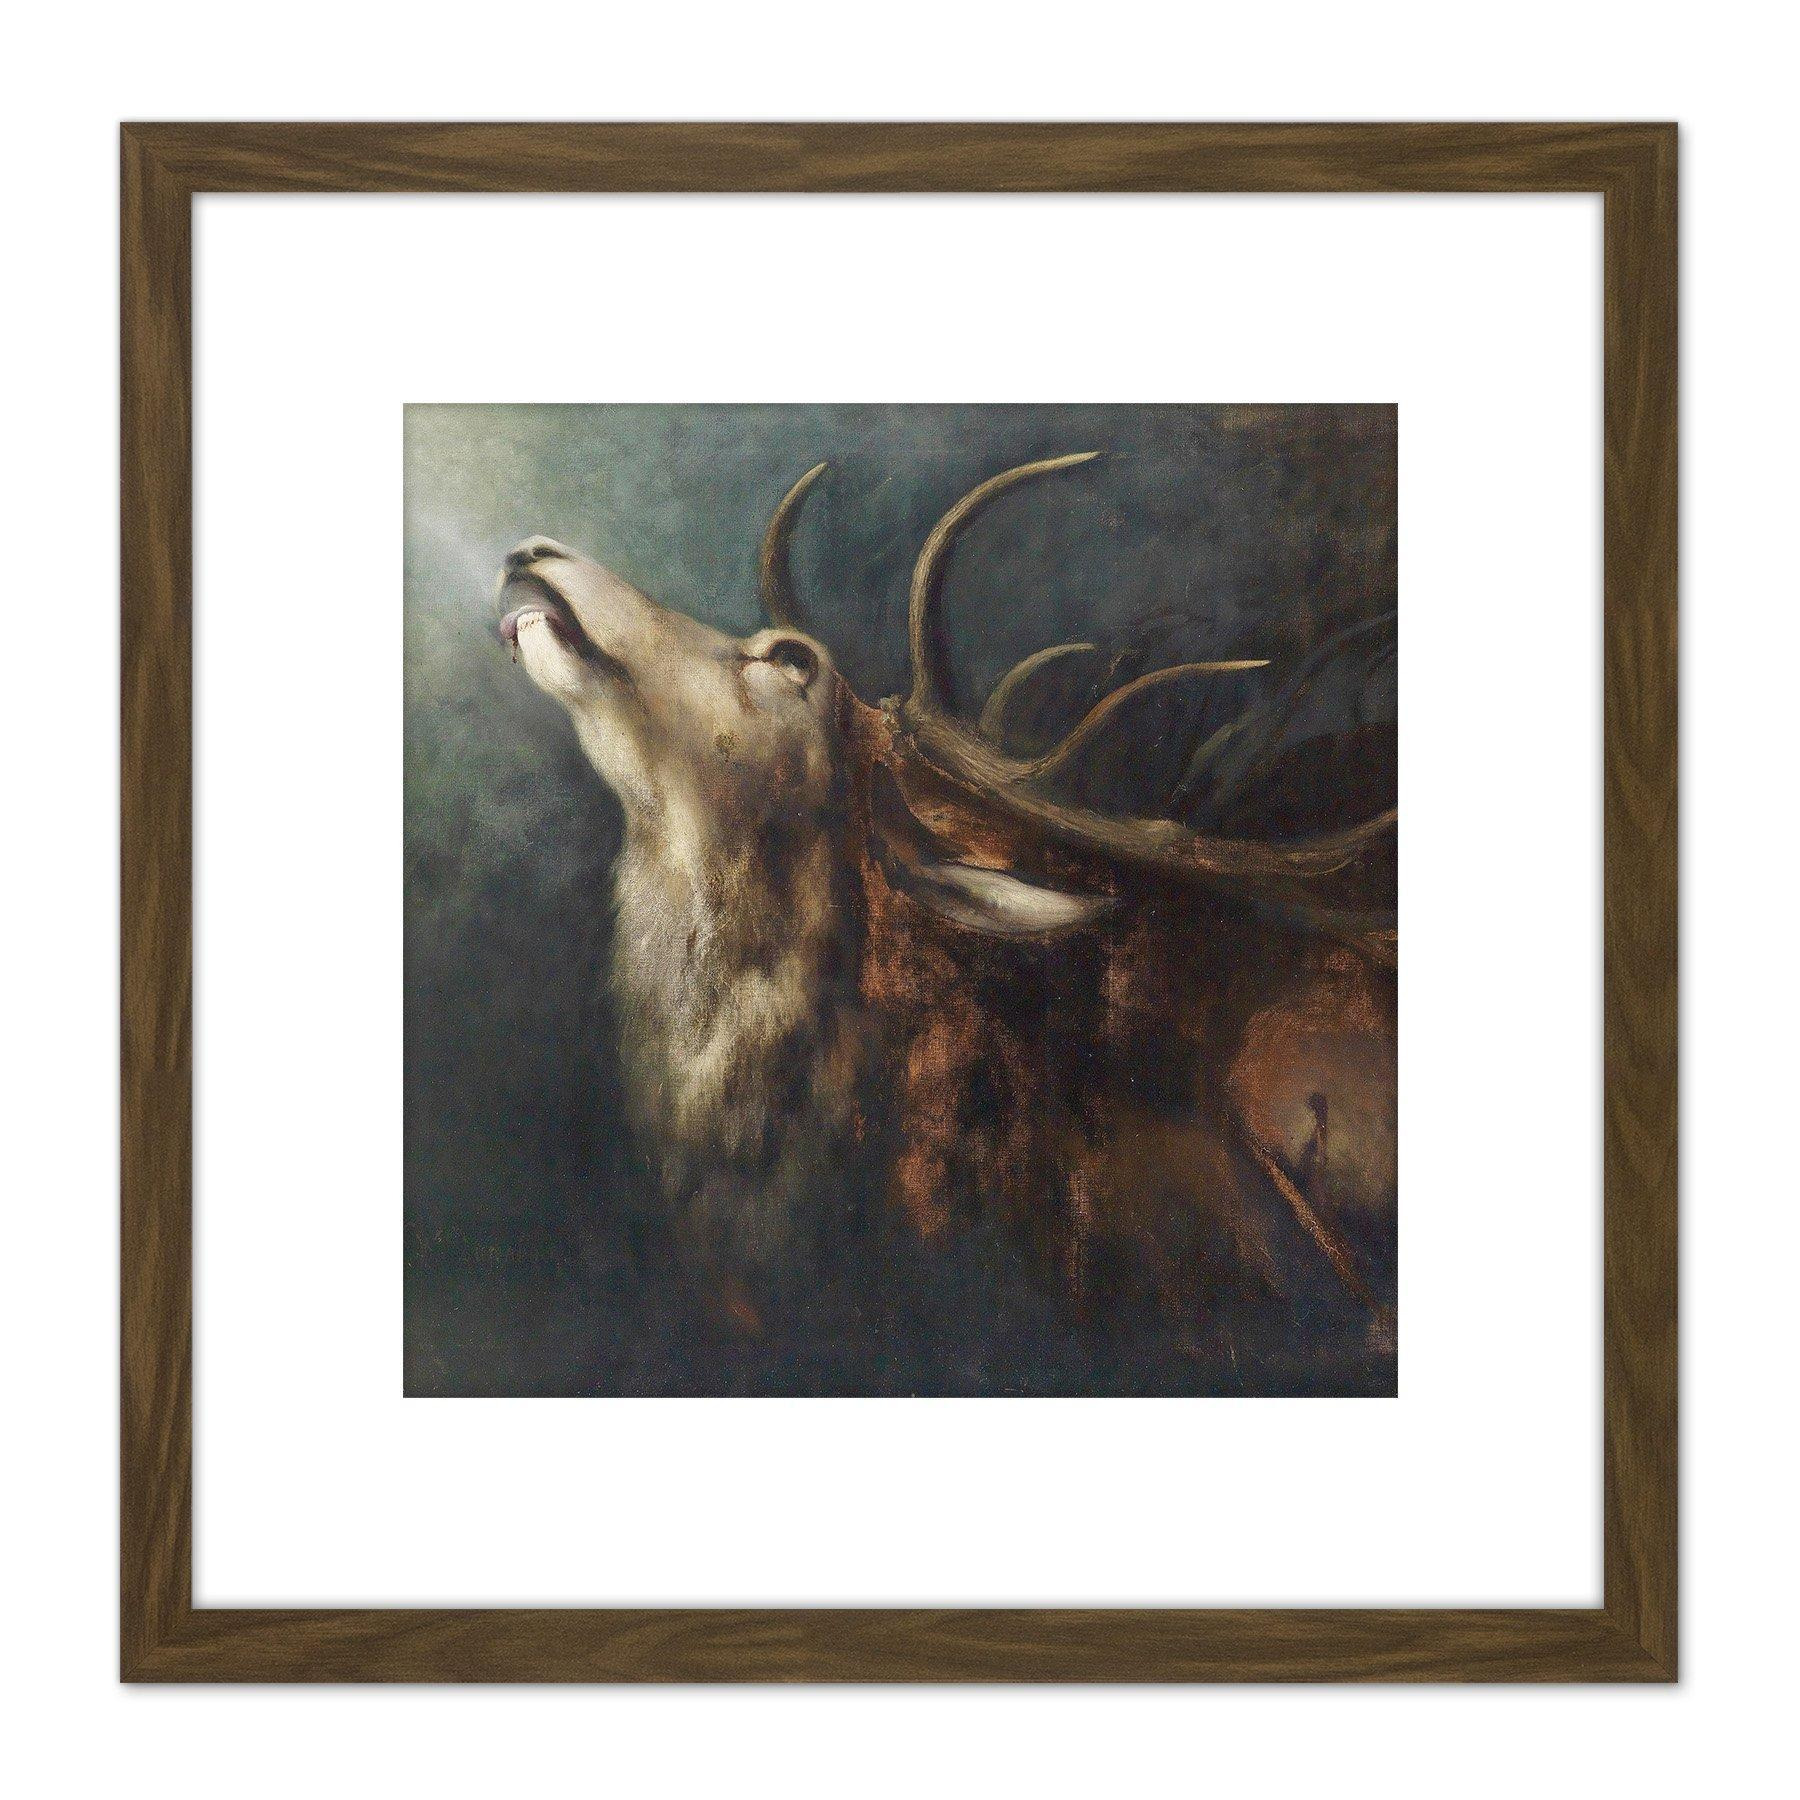 Diefenbach Dying Deer Painting 8X8 Inch Square Wooden Framed Wall Art Print Picture with Mount - image 1